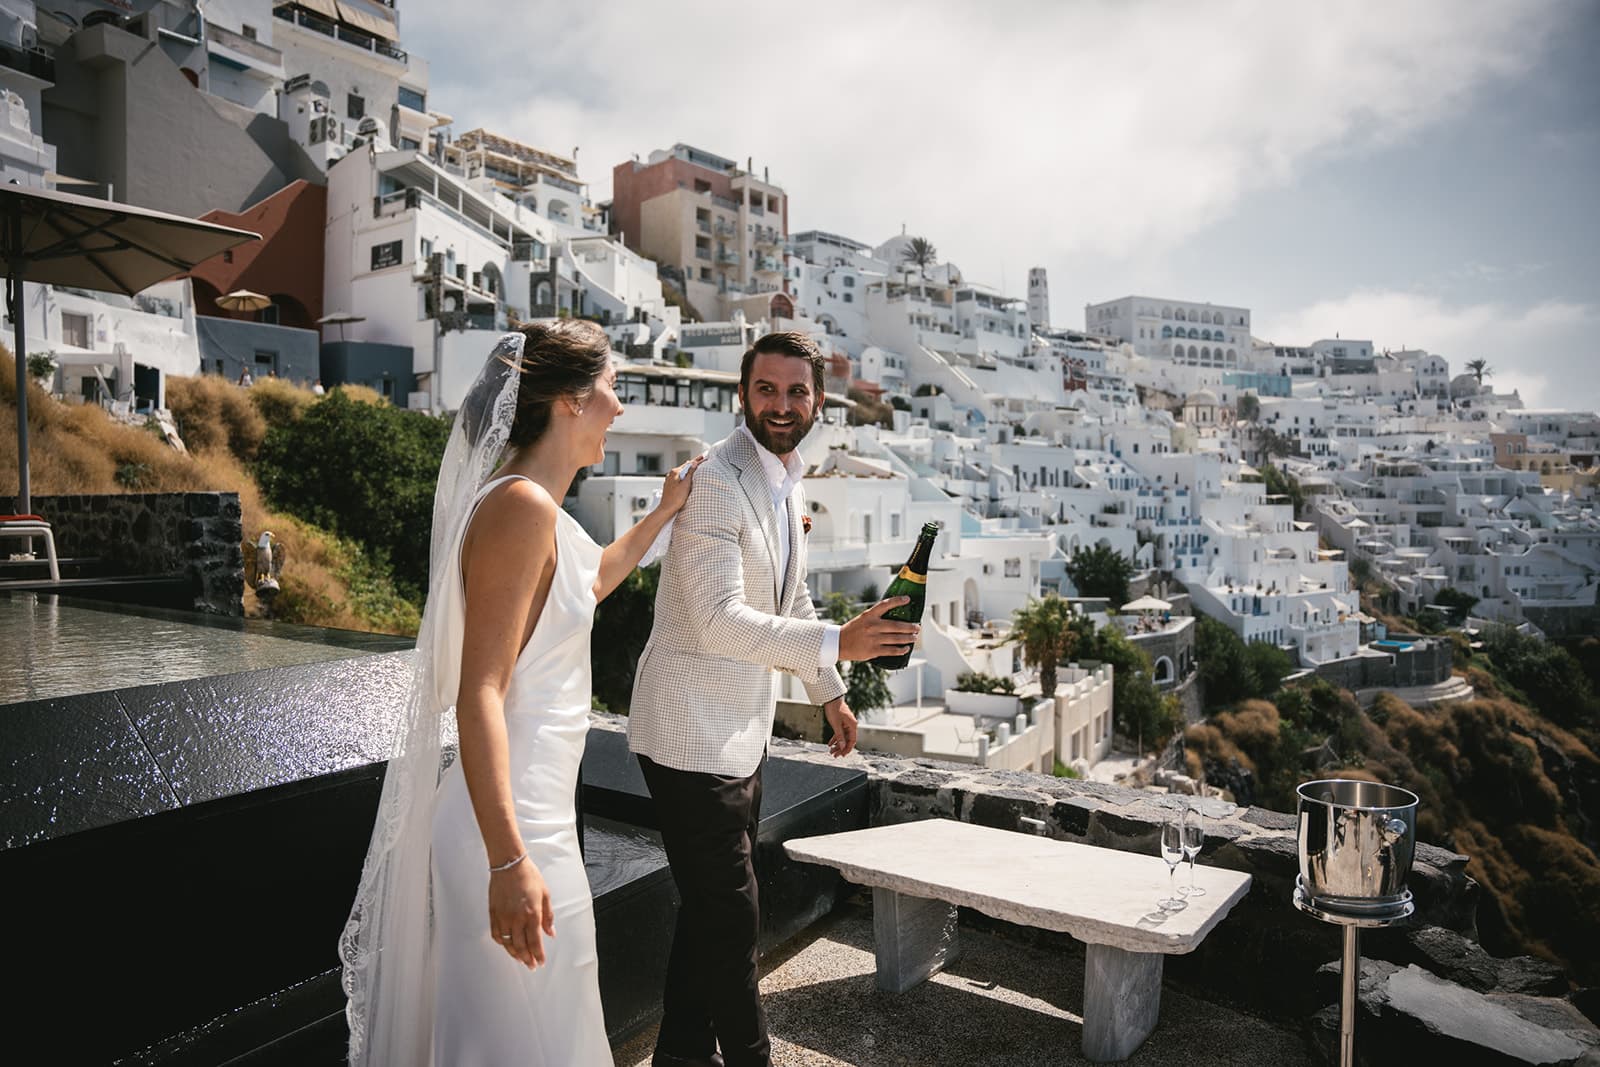 The final first look moment, anticipation giving way to joy under the Santorini sky